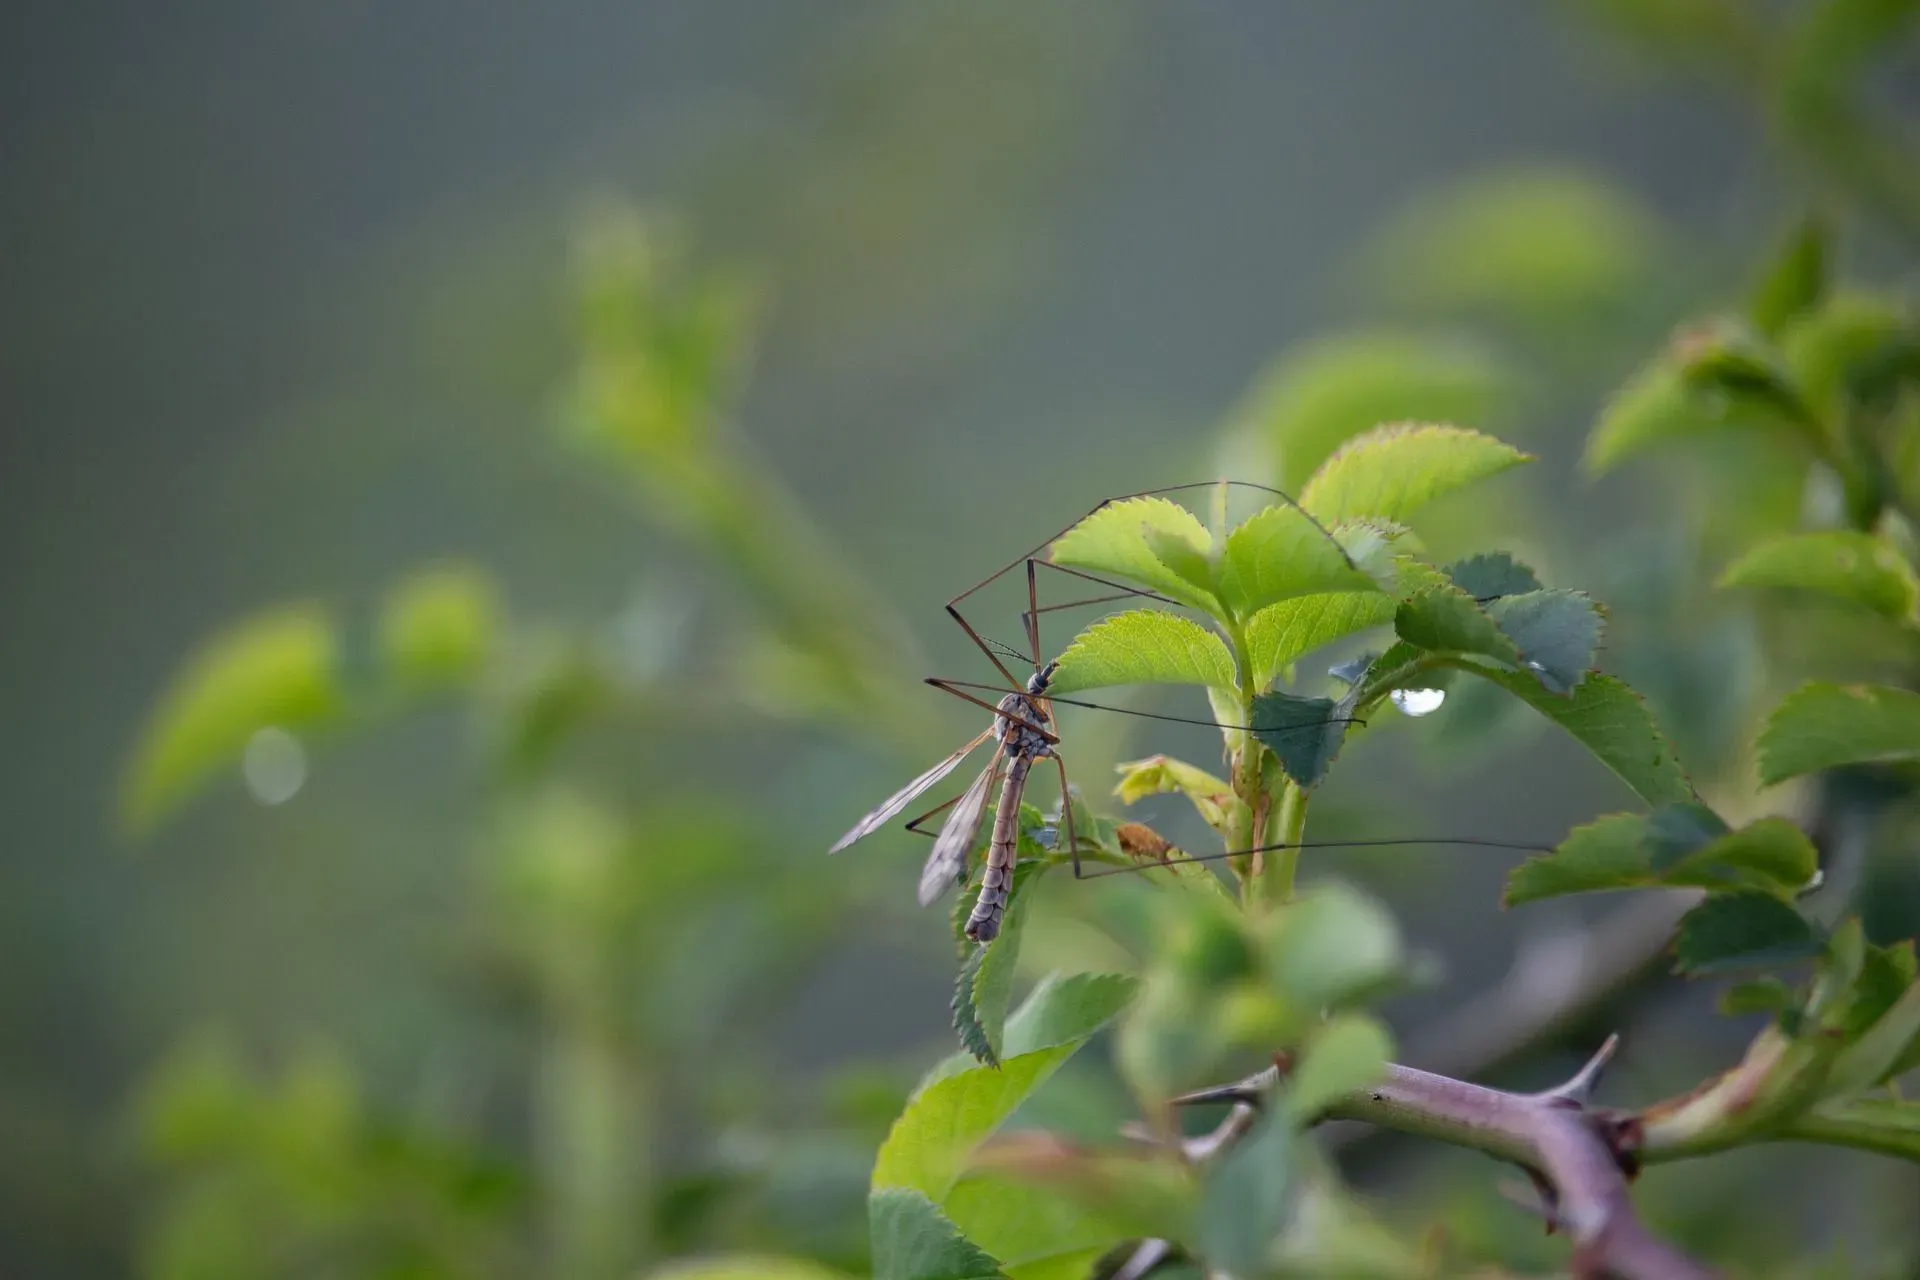 The adult crane fly diet consists of nectar from flowers or other plants.